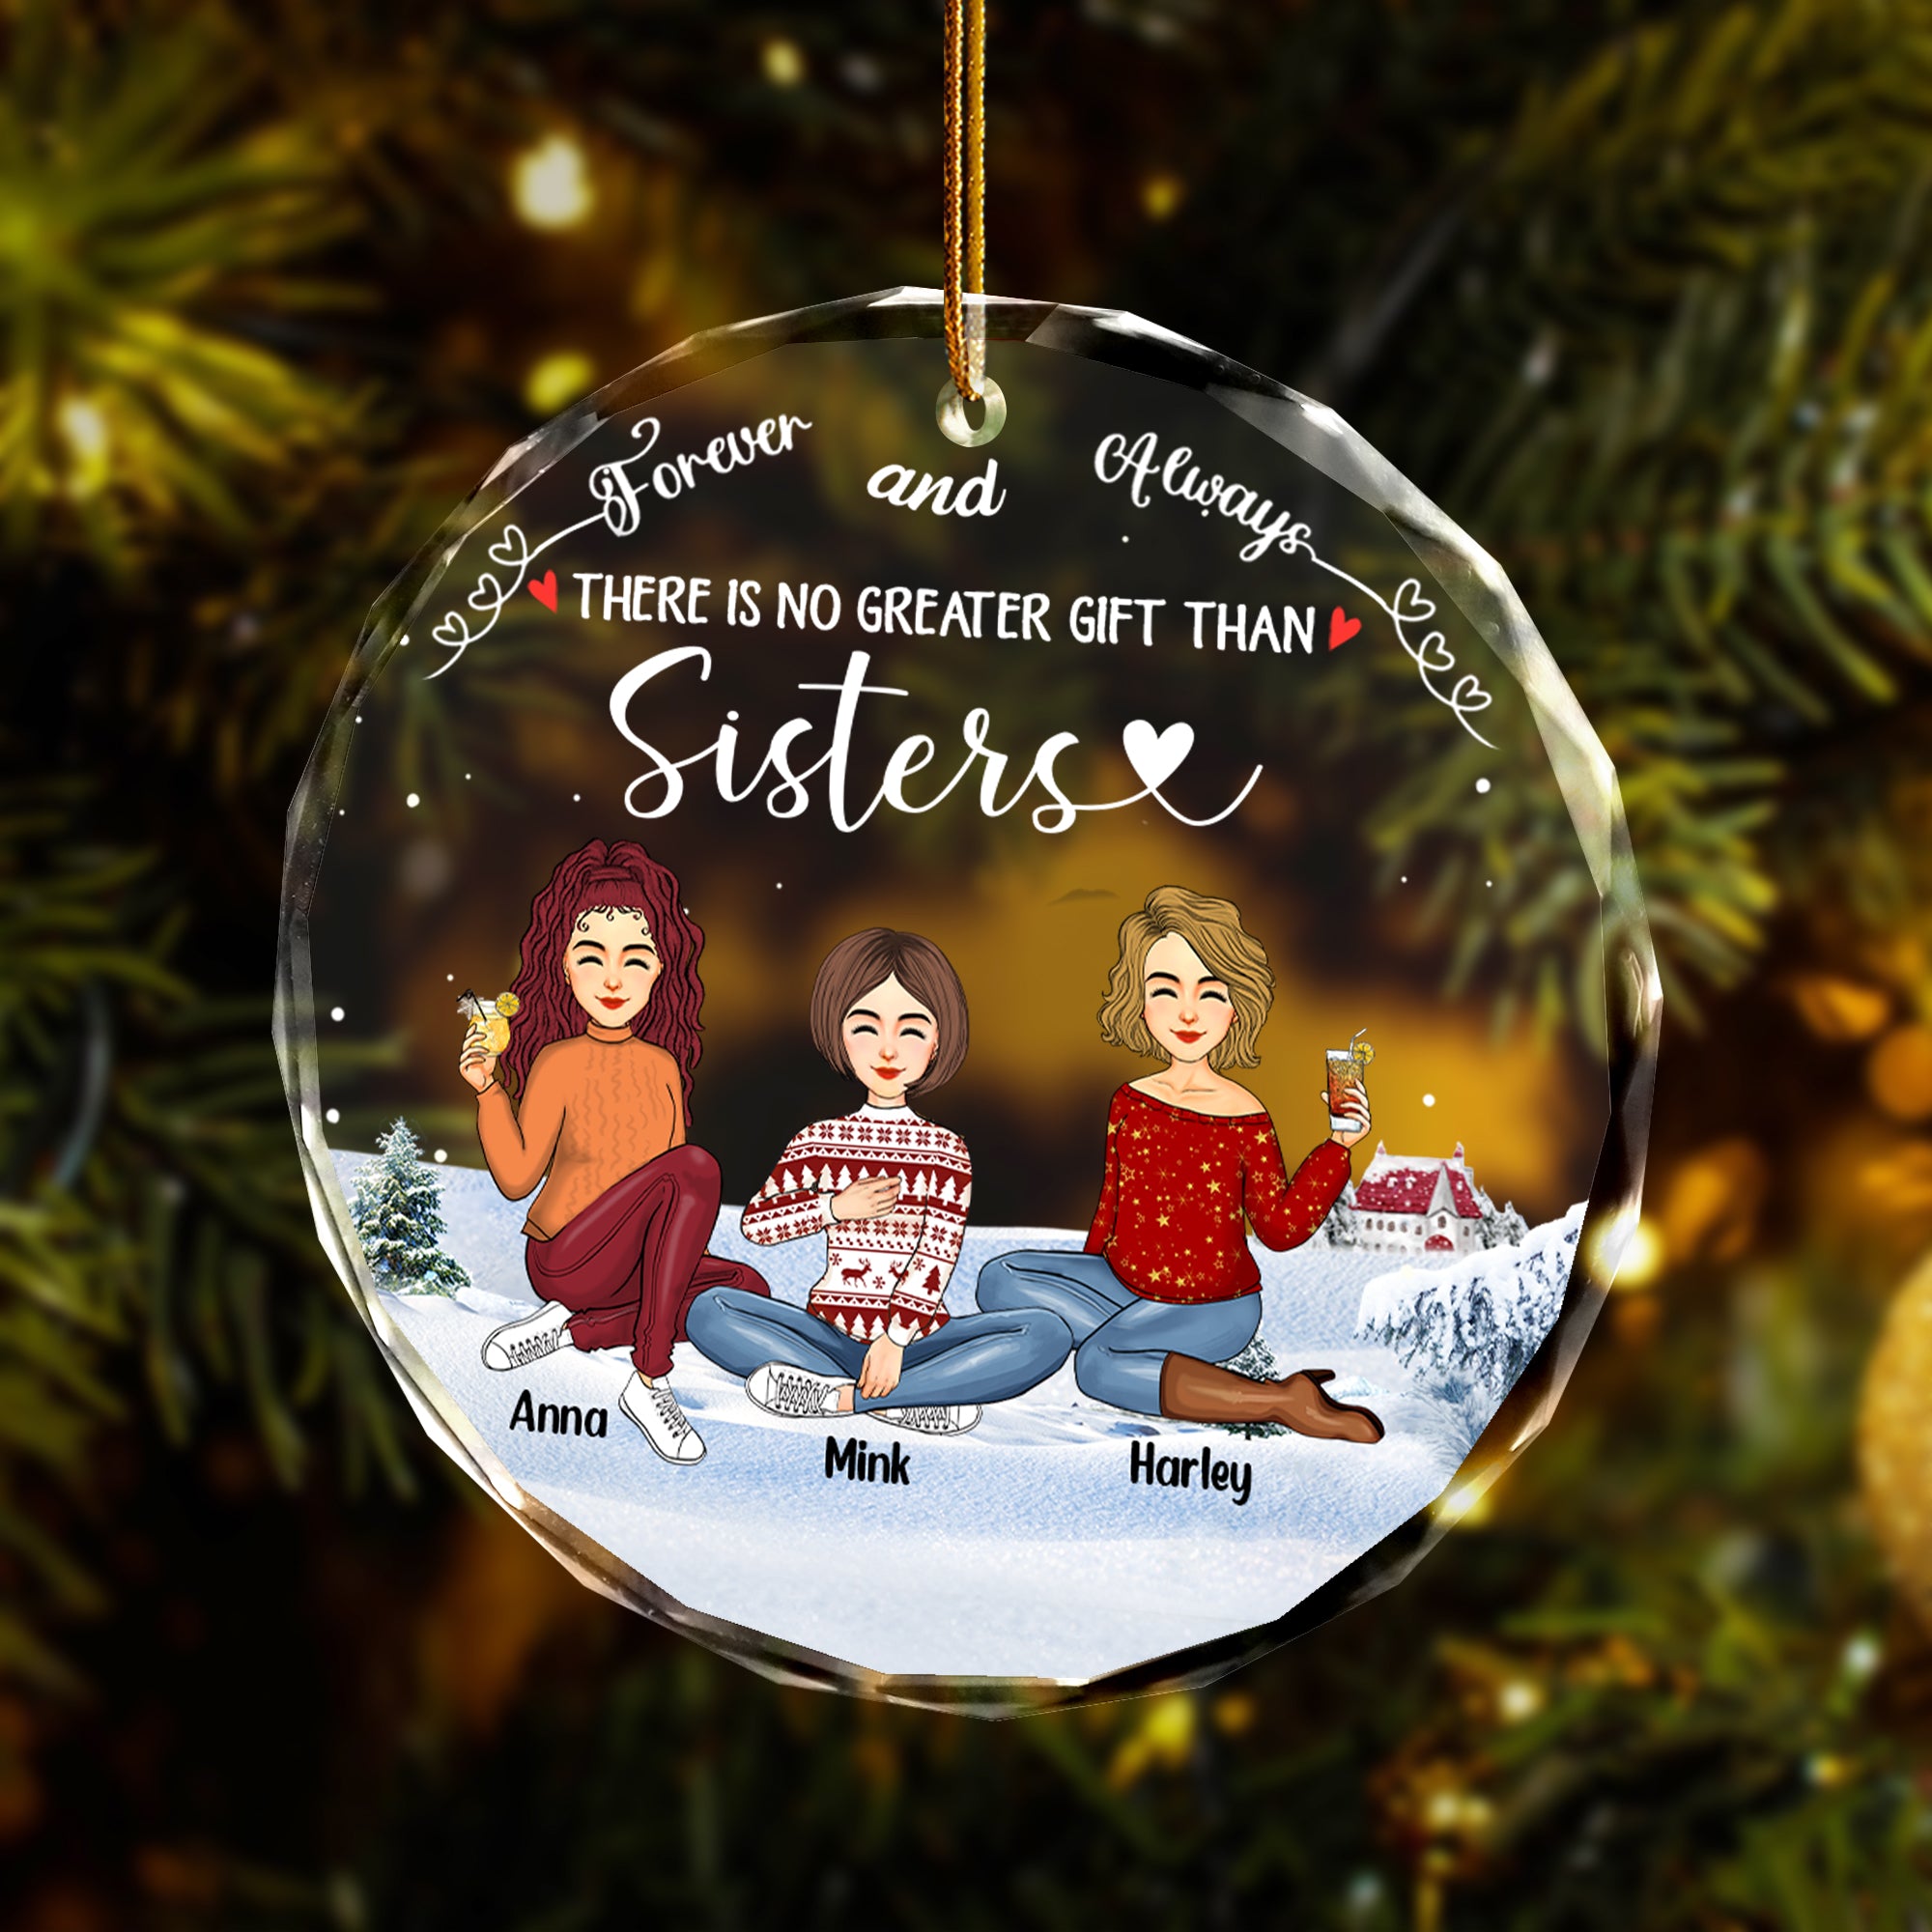 Luxury Ornament There’s No Greater Gift Than Friendship - Personalized Glass Ornament